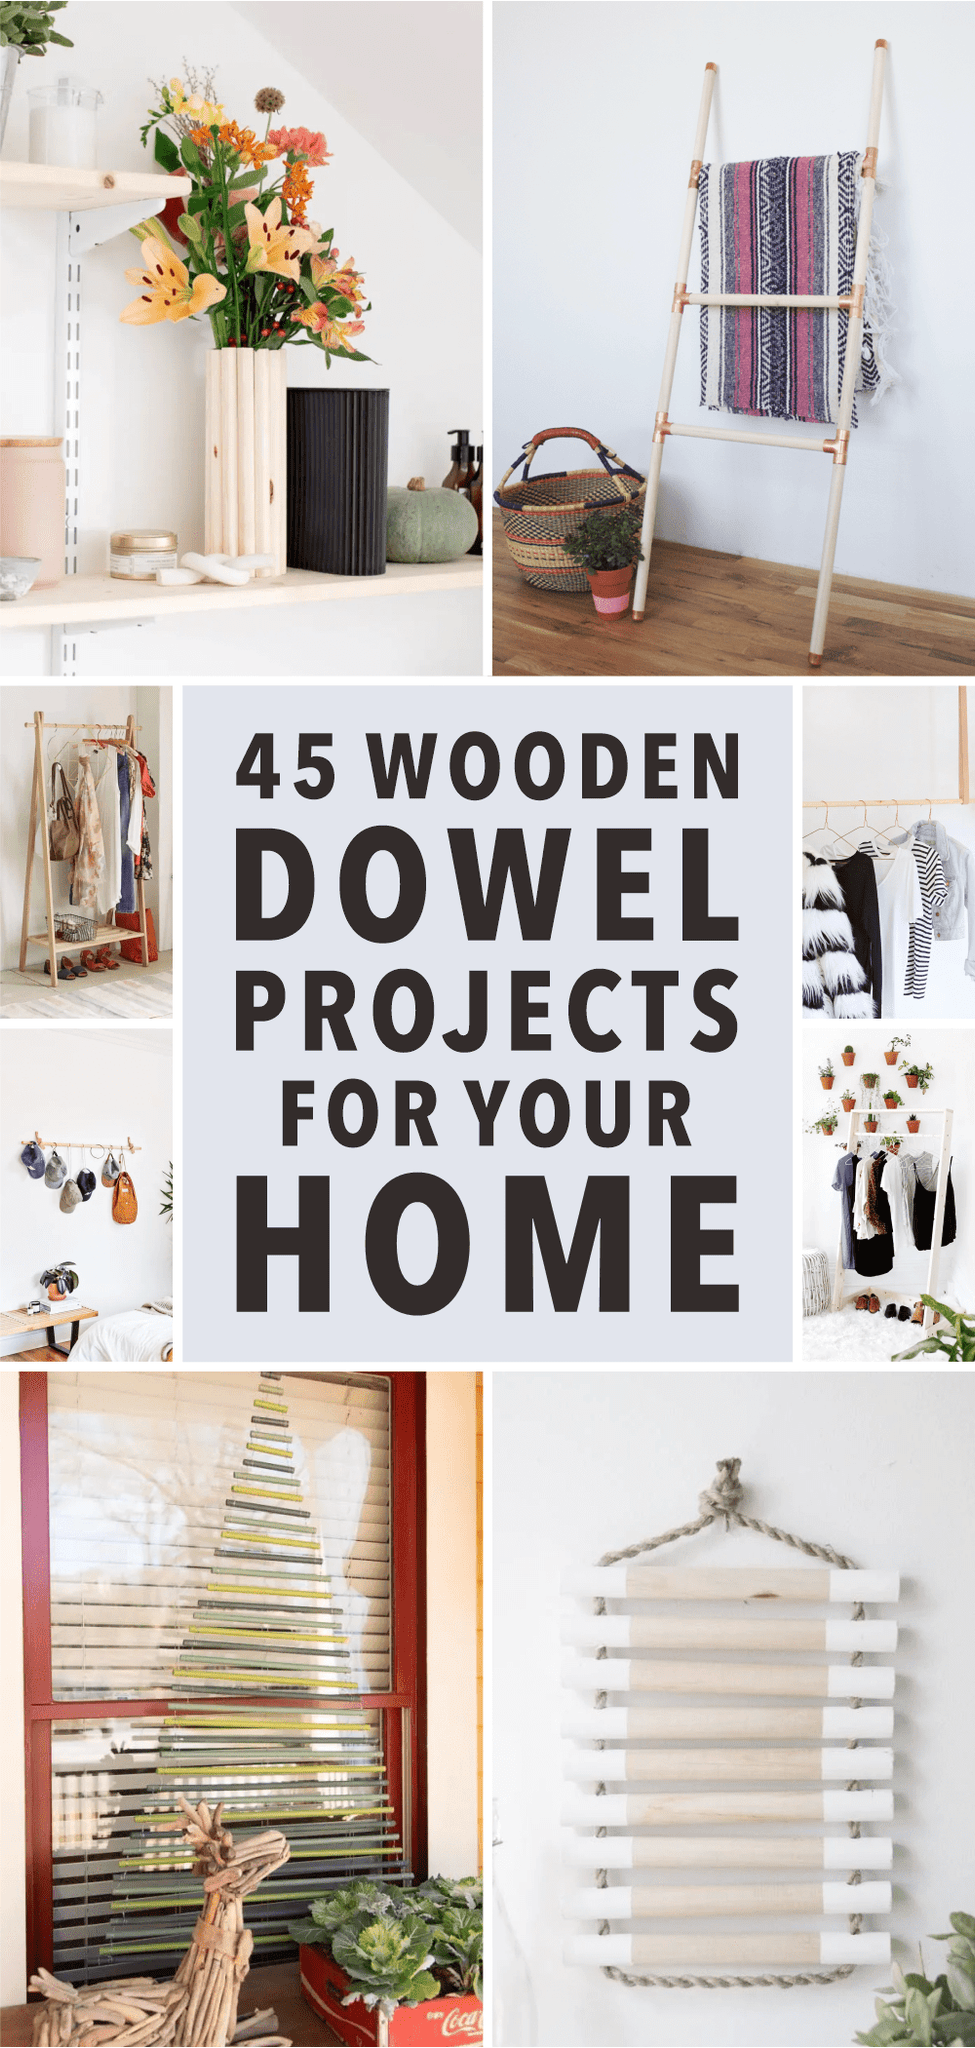 45 Wooden Dowel Projects for Your Home